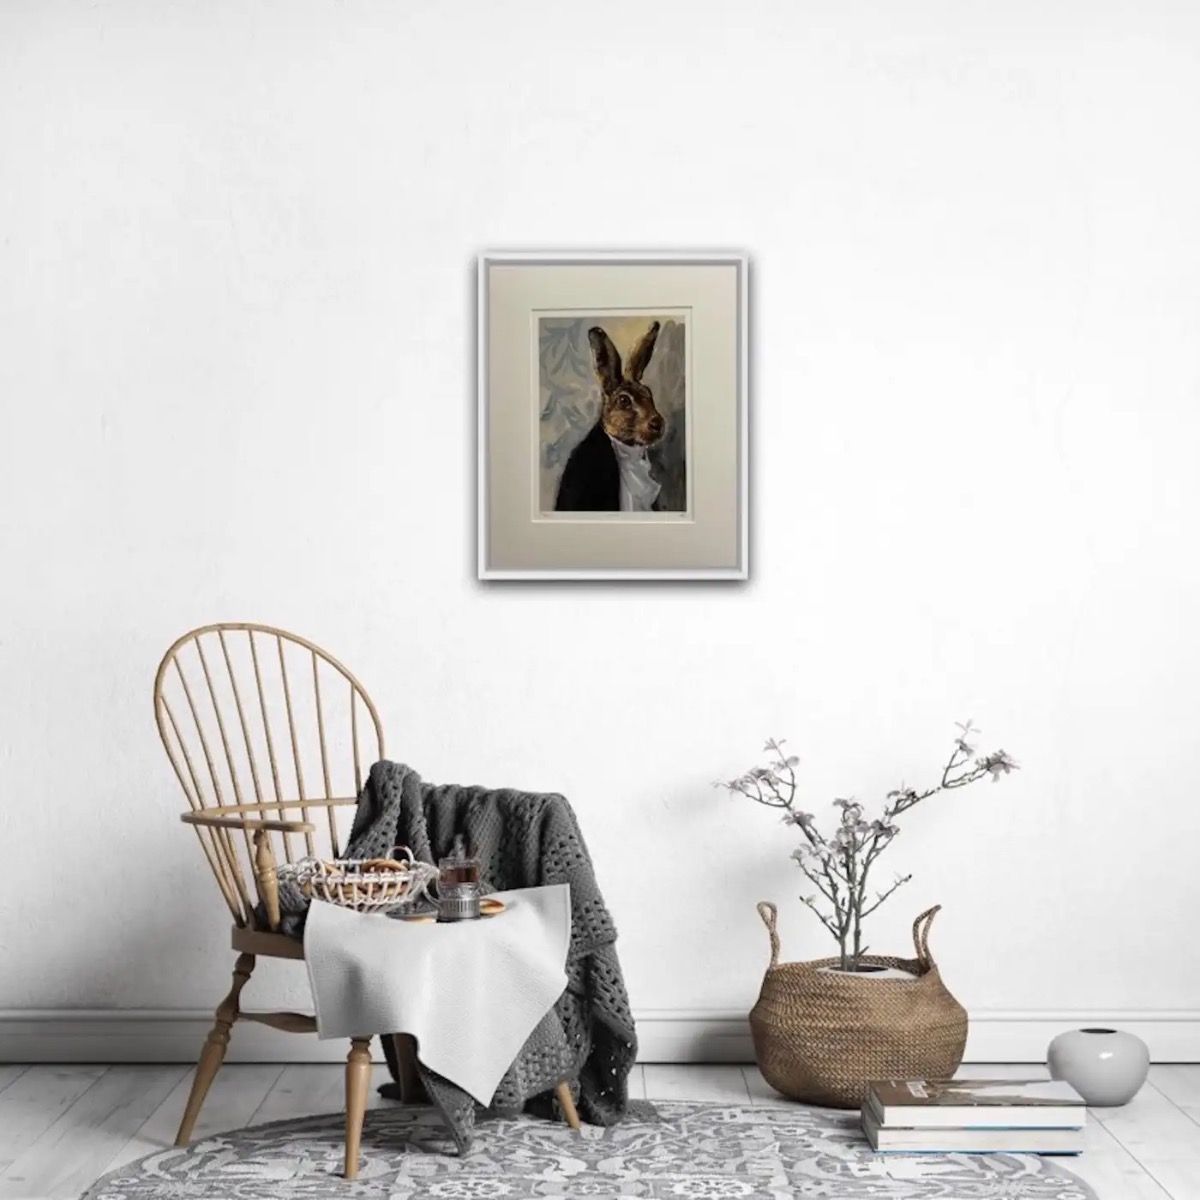 Lepus by Harry Bunce - Secondary Image